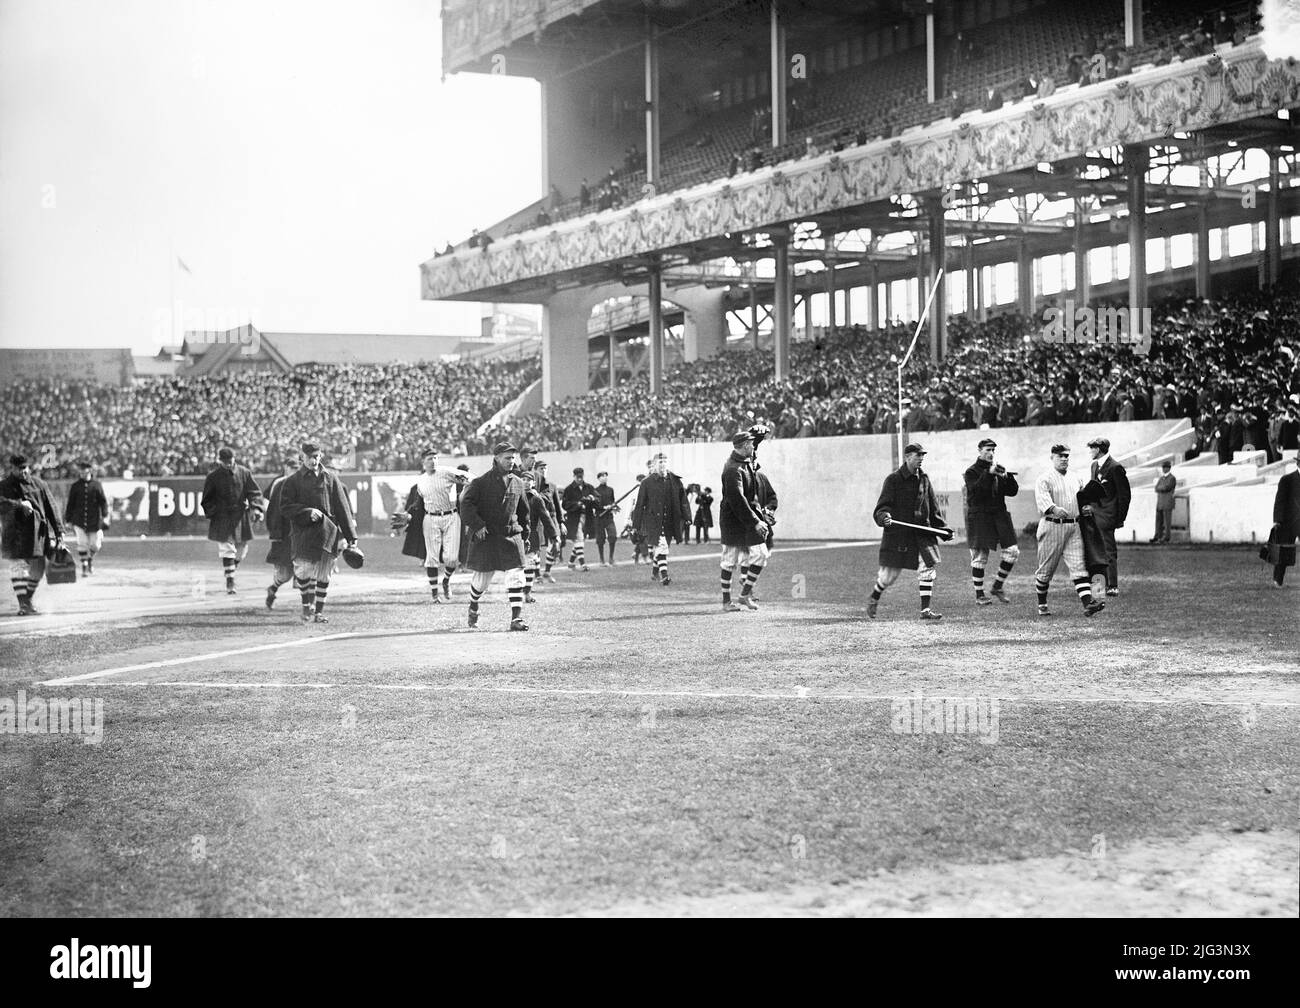 New York Giants players walking onto field prior to Game One of the 1912 World Series, Polo Grounds, New York City, New York, USA, Bain News Service, October 8, 1912 Stock Photo